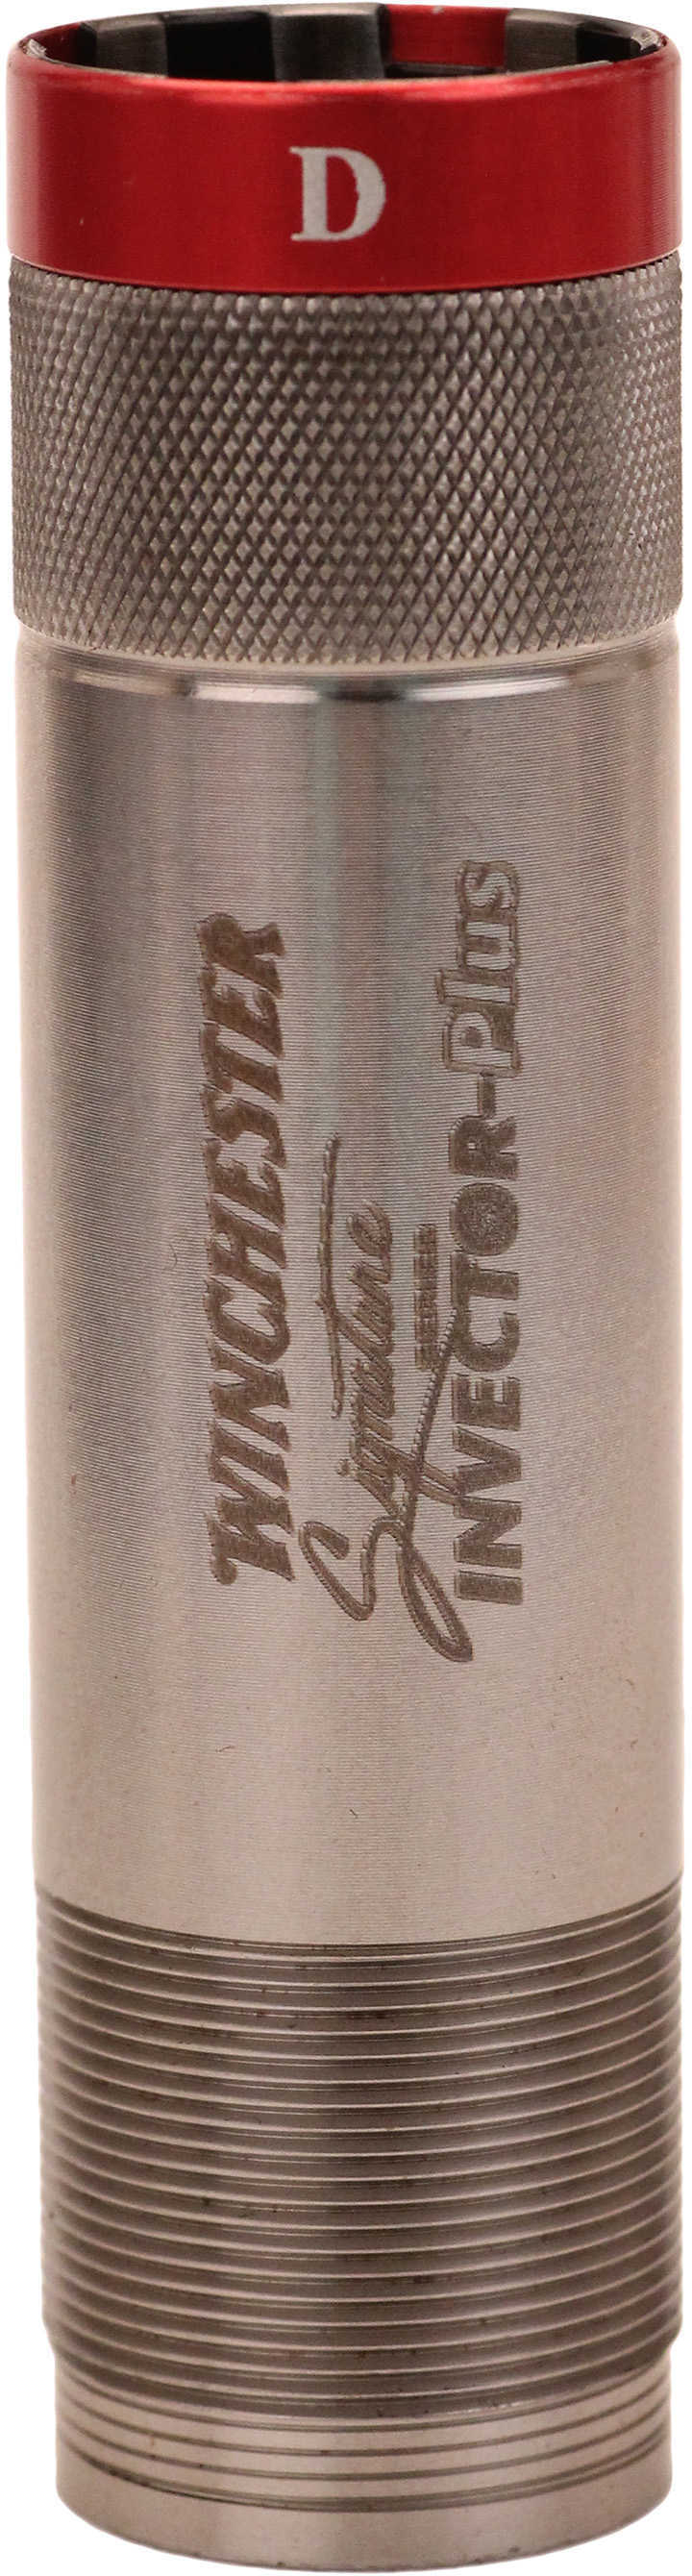 Winchester Signature Extended Invector Plus Choke Tube 12 Gauge Spreader 6130793 (1 choke)